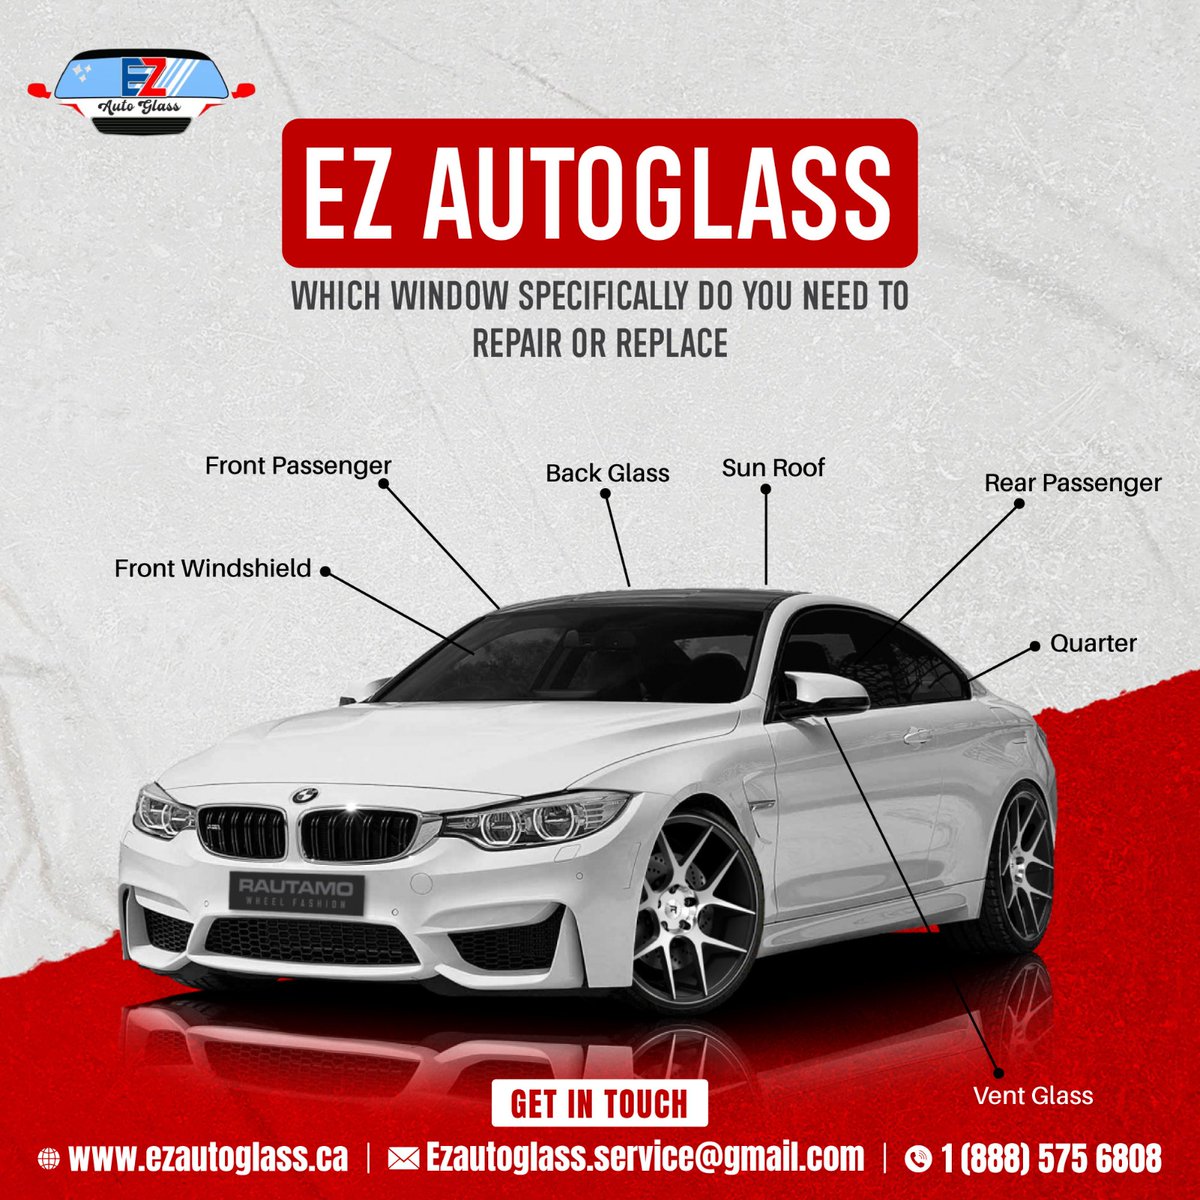 From windshields to windows, we've got your glass covered! 🔍🚗 Ez Auto Glass is your one-stop destination for all types of glass repair and replacement services. 🛠️✨ #EzAutoGlass #GlassRepair #GlassReplacement #DriveWithConfidence
#windshieldreplacement #windshieldreplacements